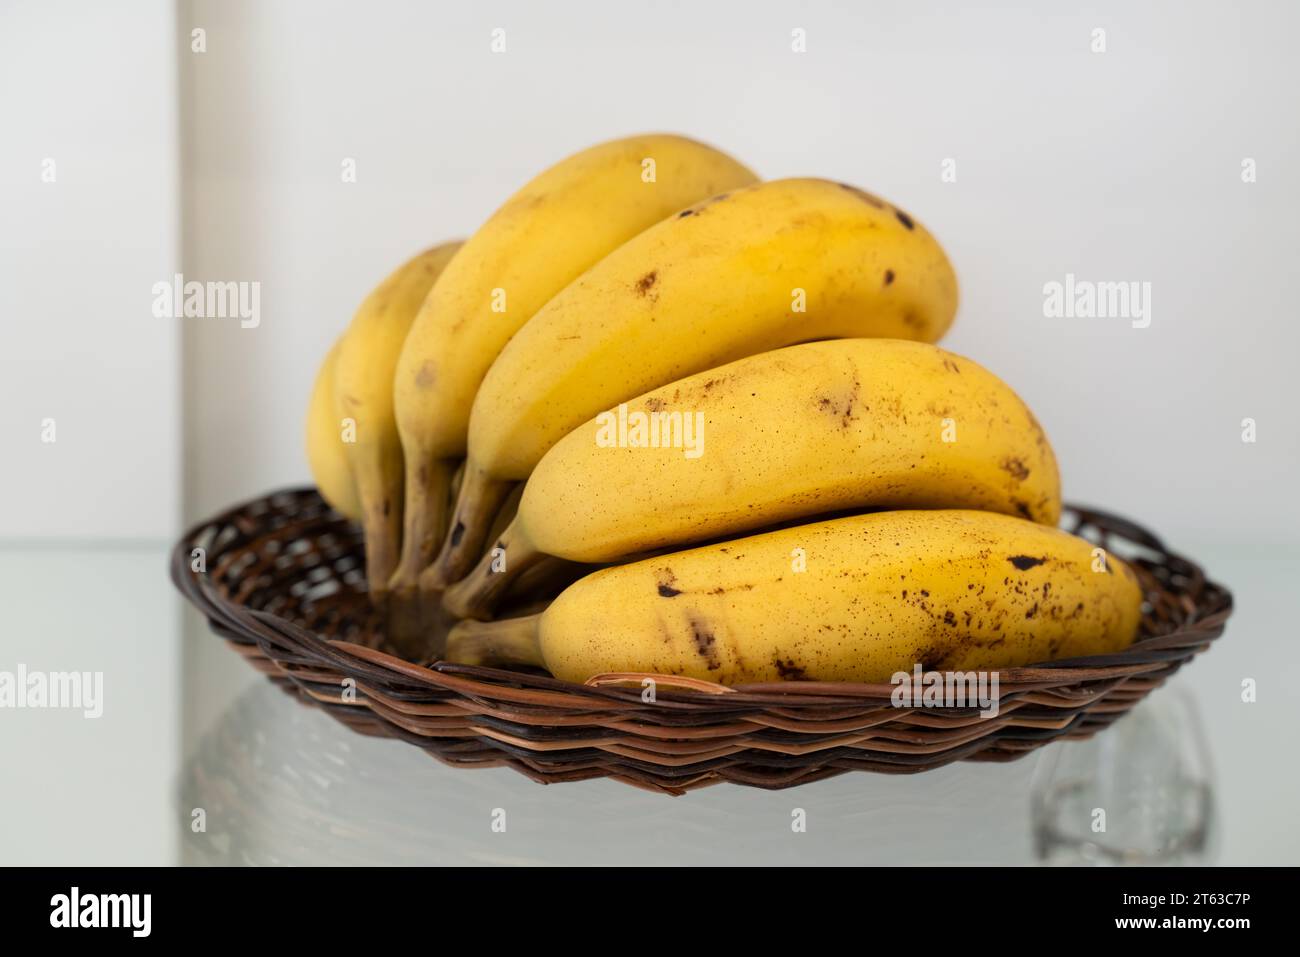 A bunch of fresh banana lie on the table in a modern kitchen, healthy life concept. Stock Photo